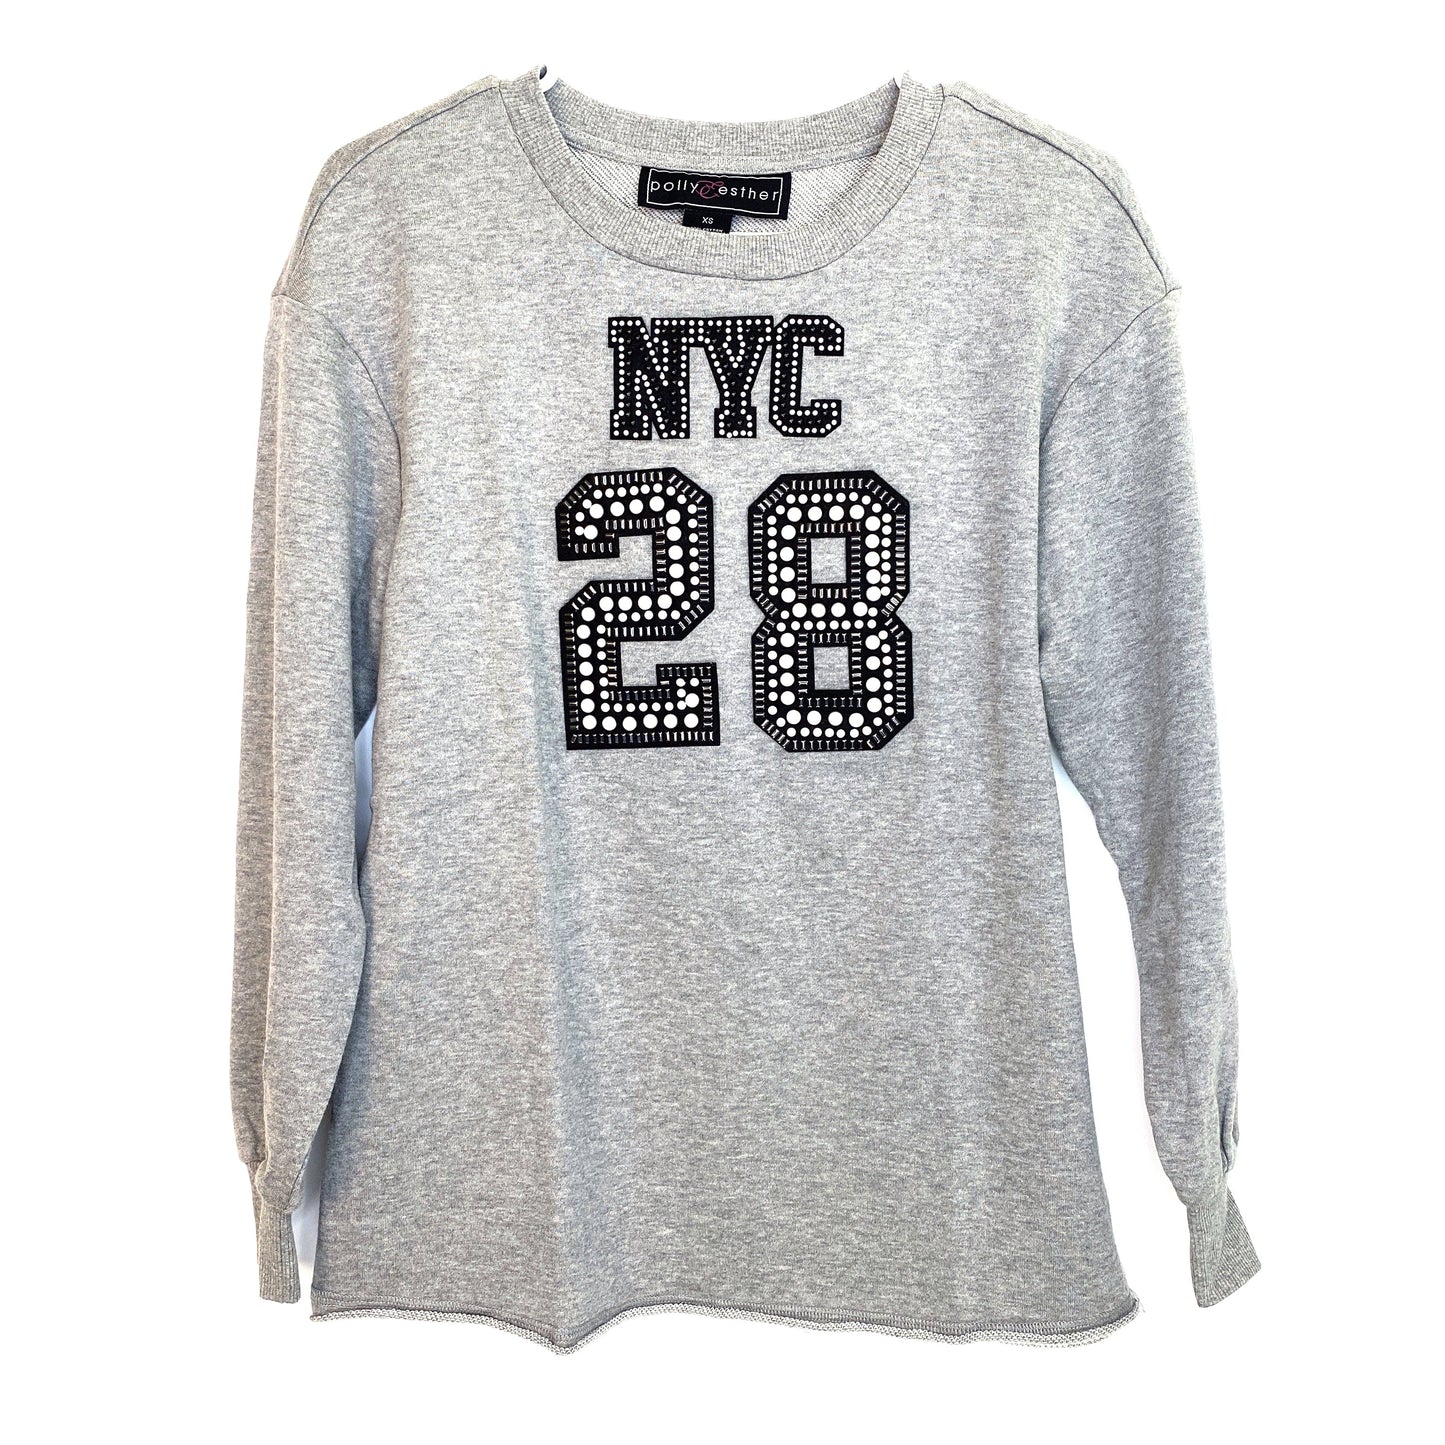 Polly & Esther Womens Size XS Gray Sweatshirt NYC 28 L/s